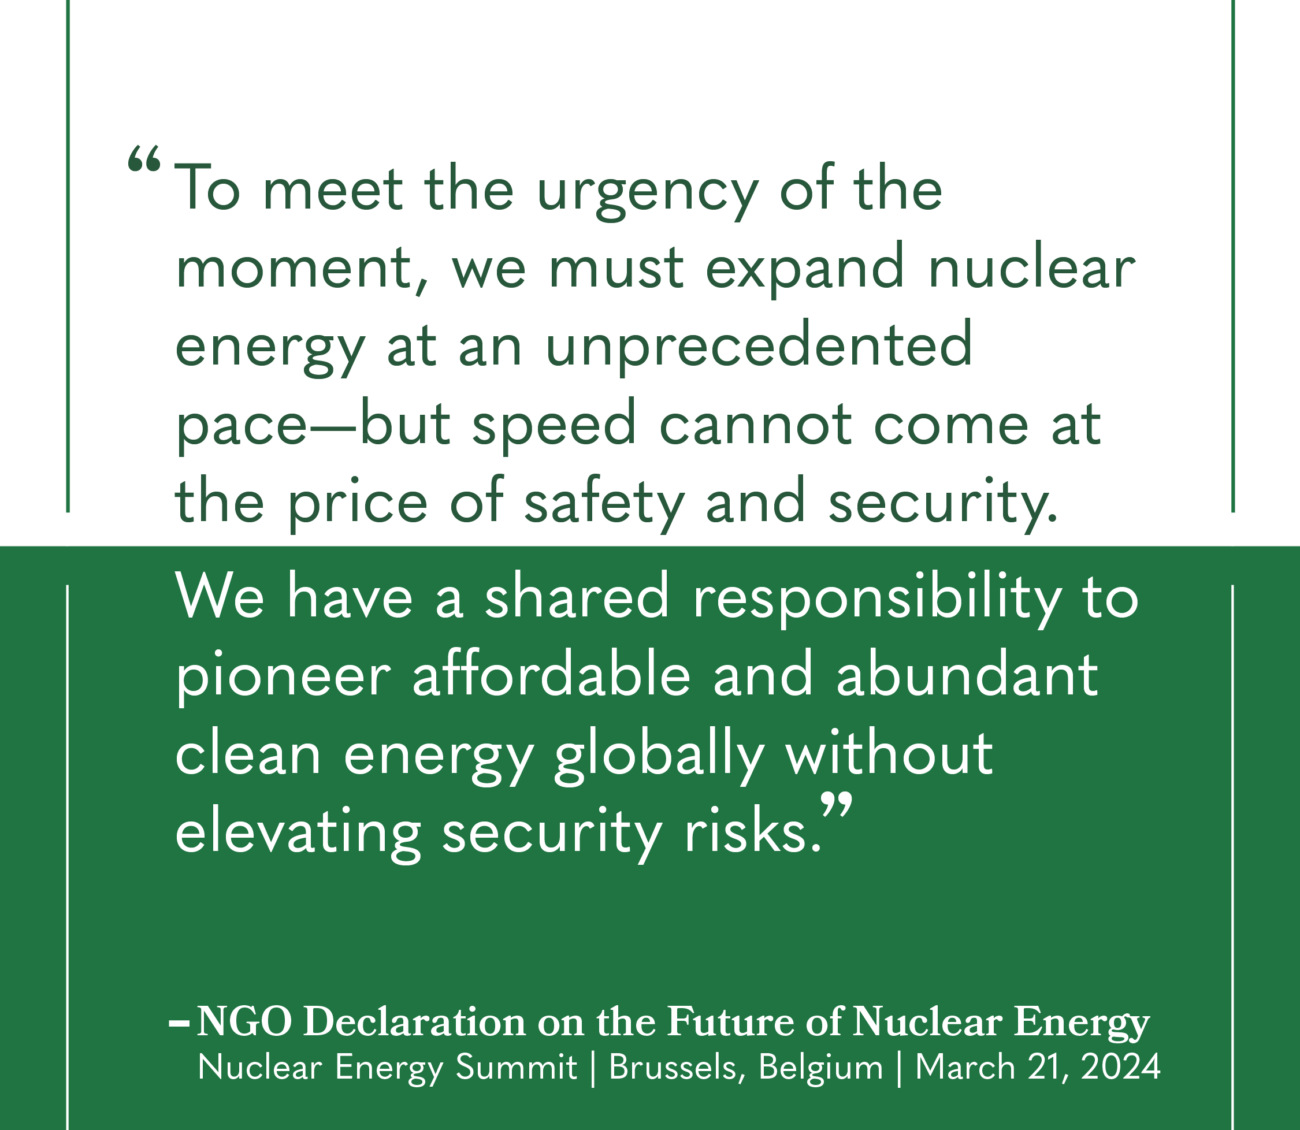 WINS Becomes Signatory to NGO Declaration on the Future of Nuclear Energy